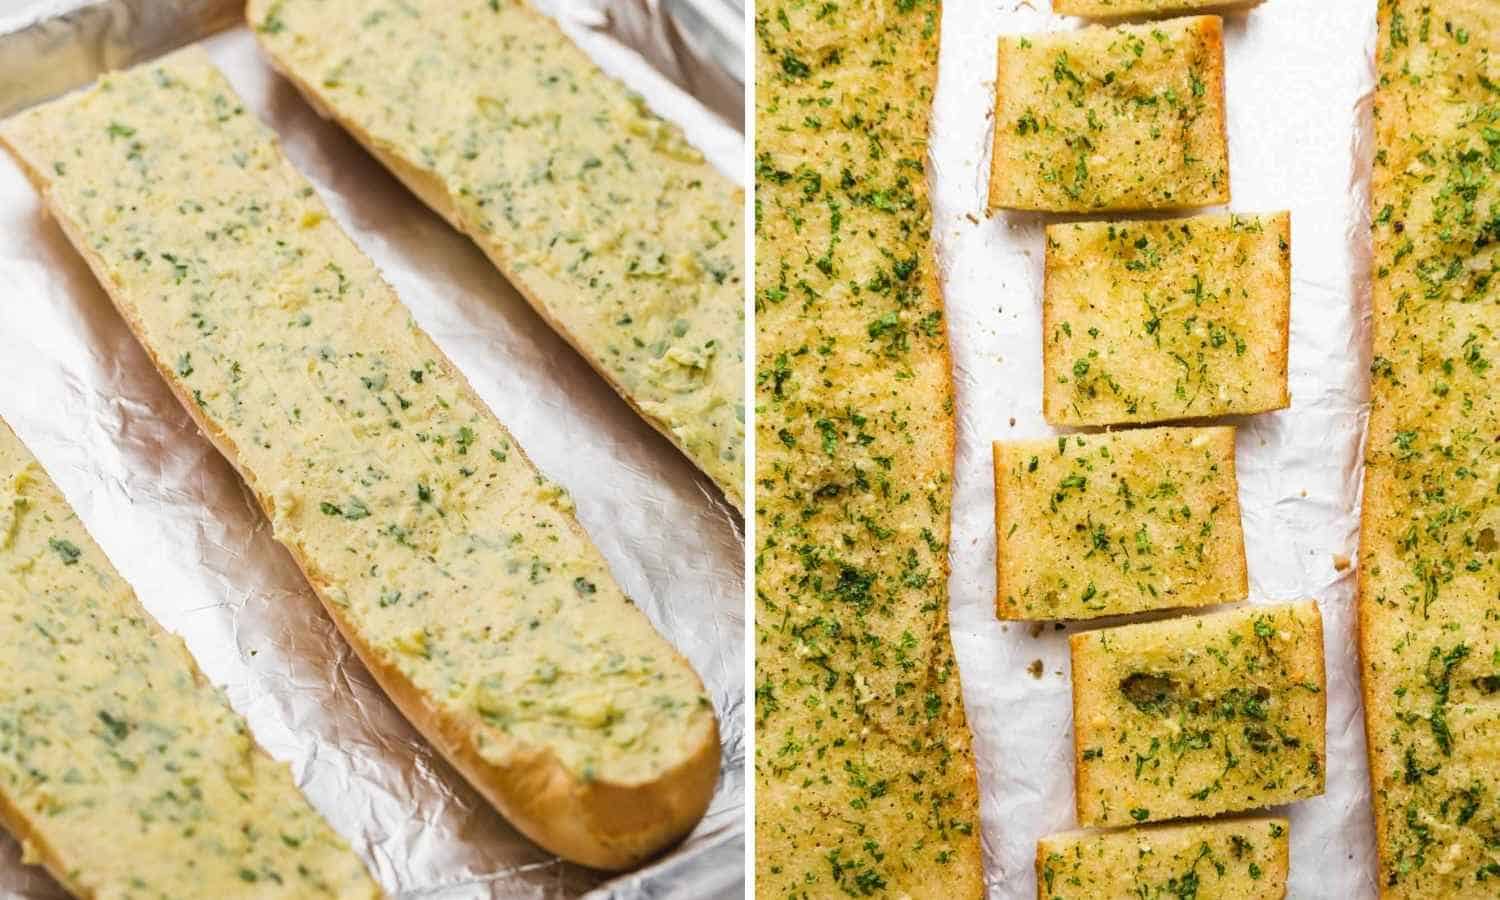 Collage of two images showing the garlic bread before and after baking